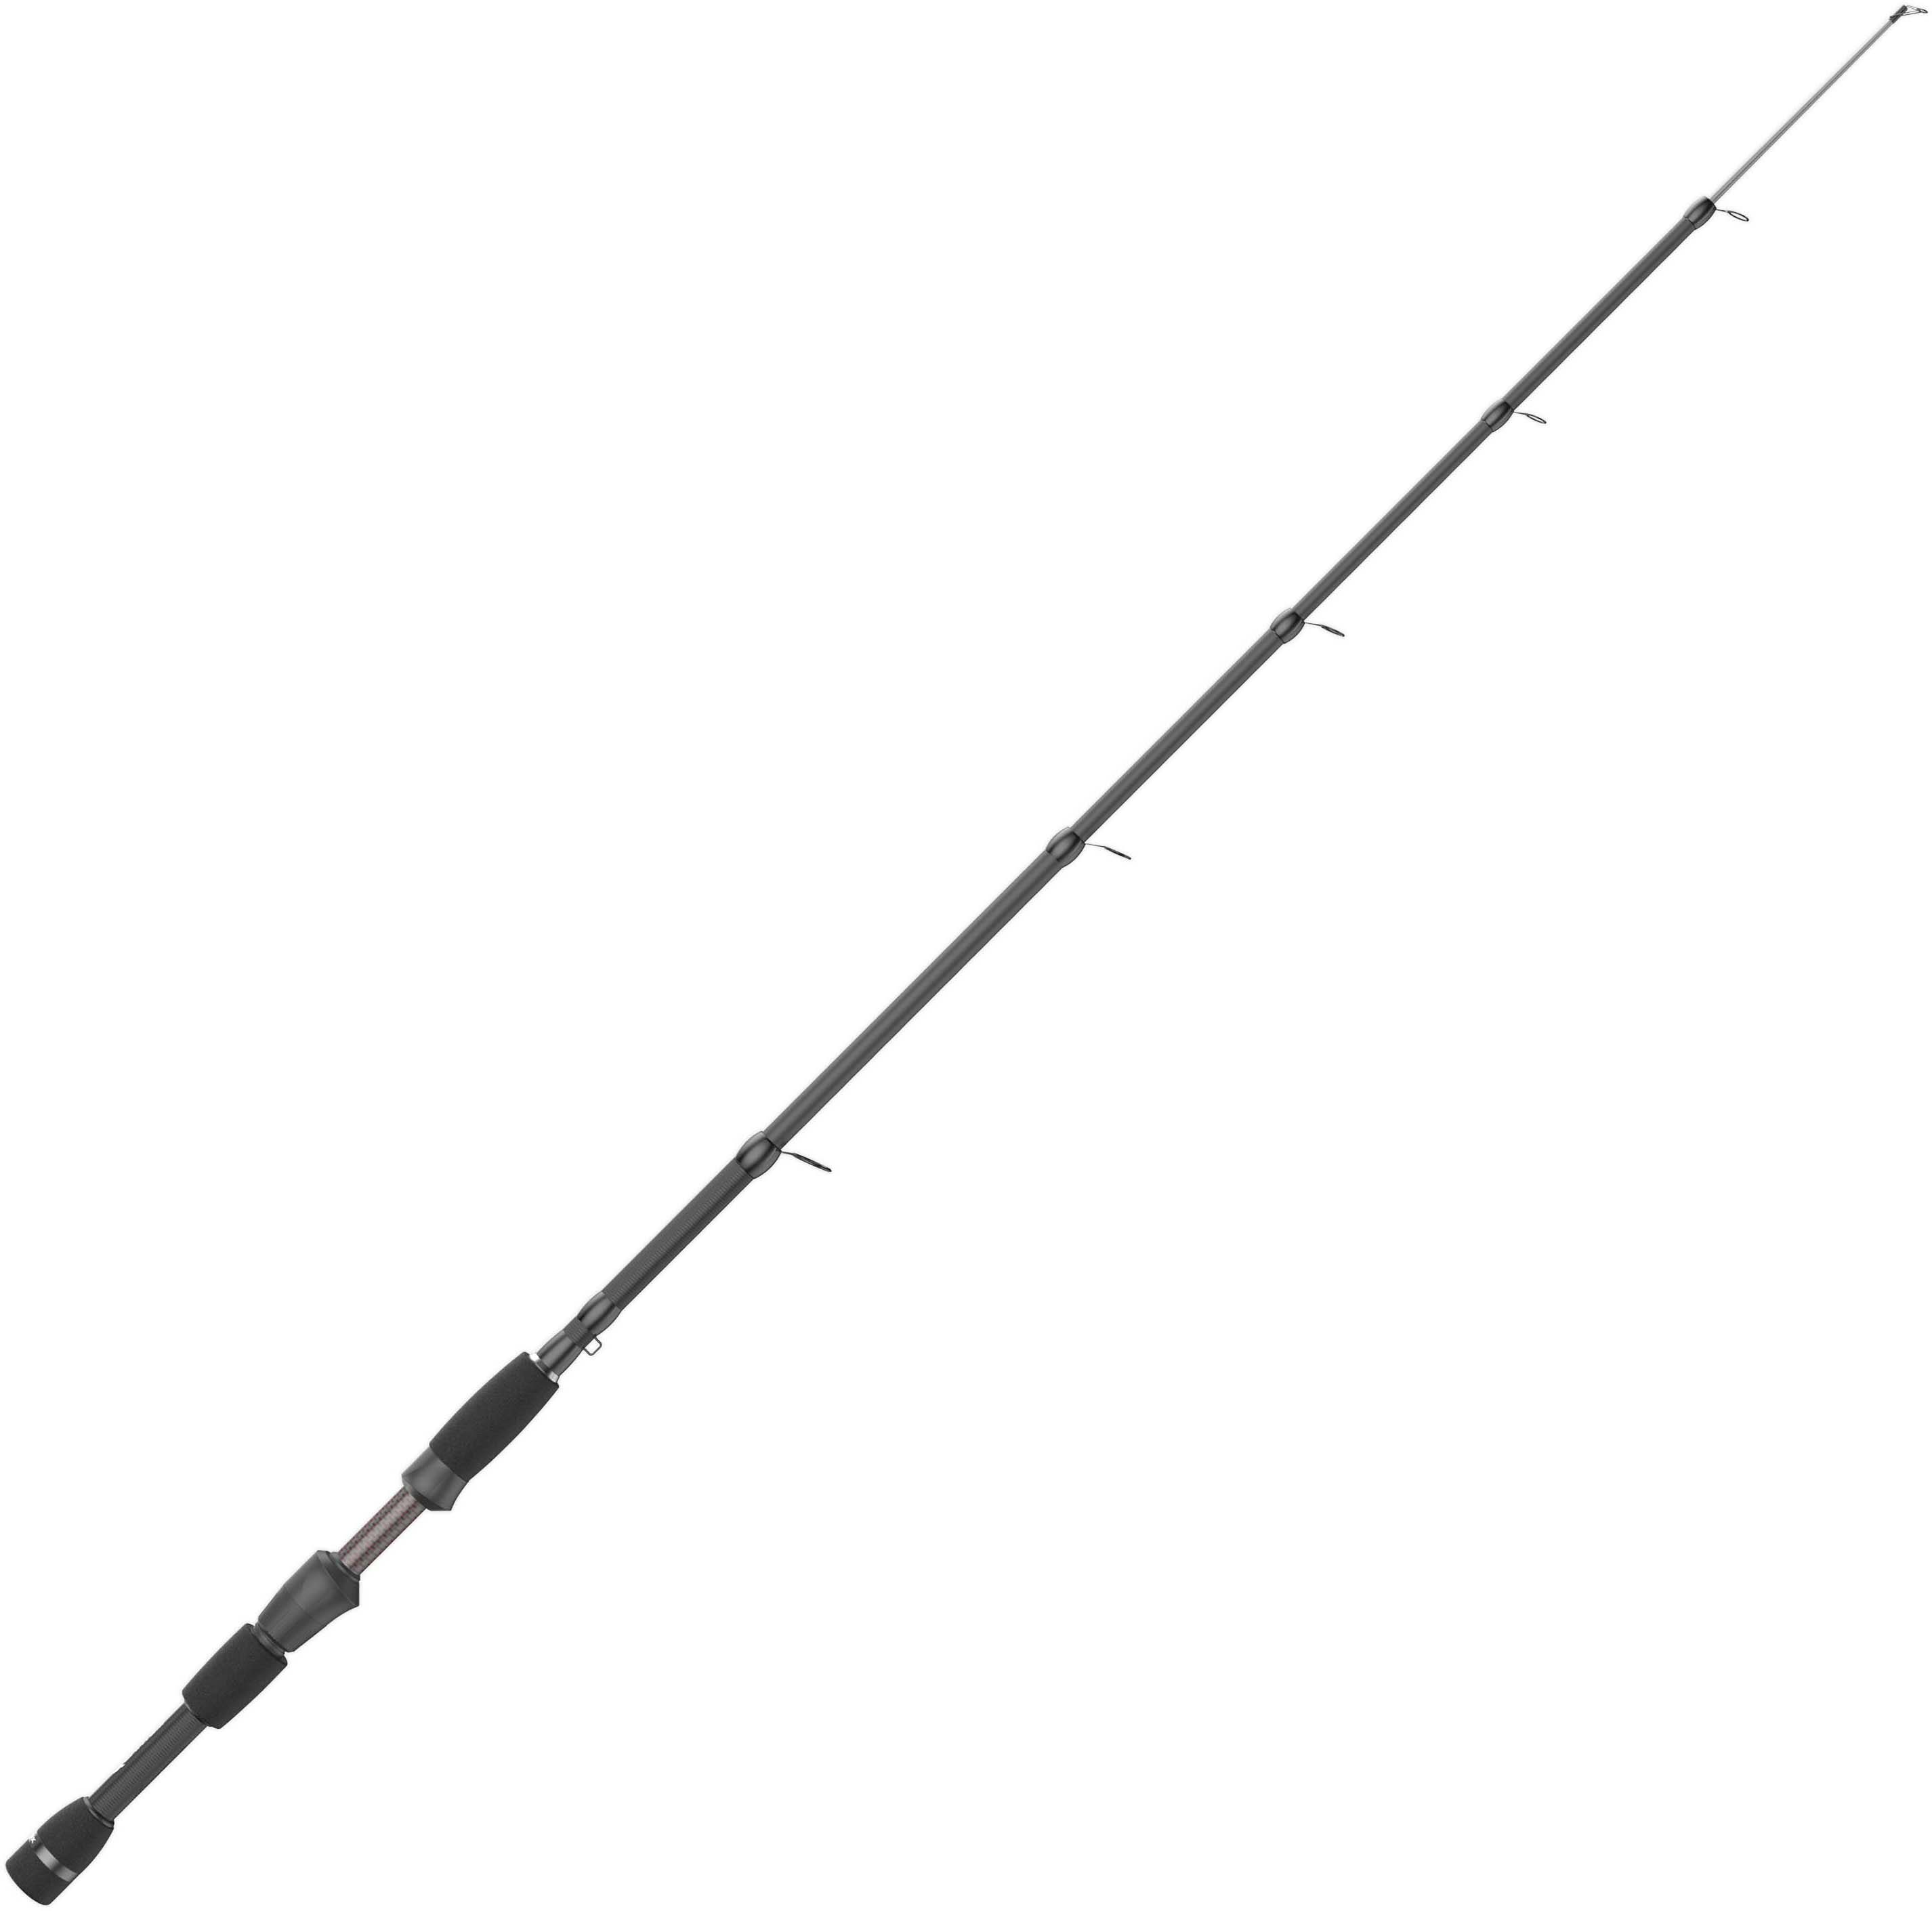 Quantum Embark Tele Spinning Rod  $1.00 Off Free Shipping over $49!